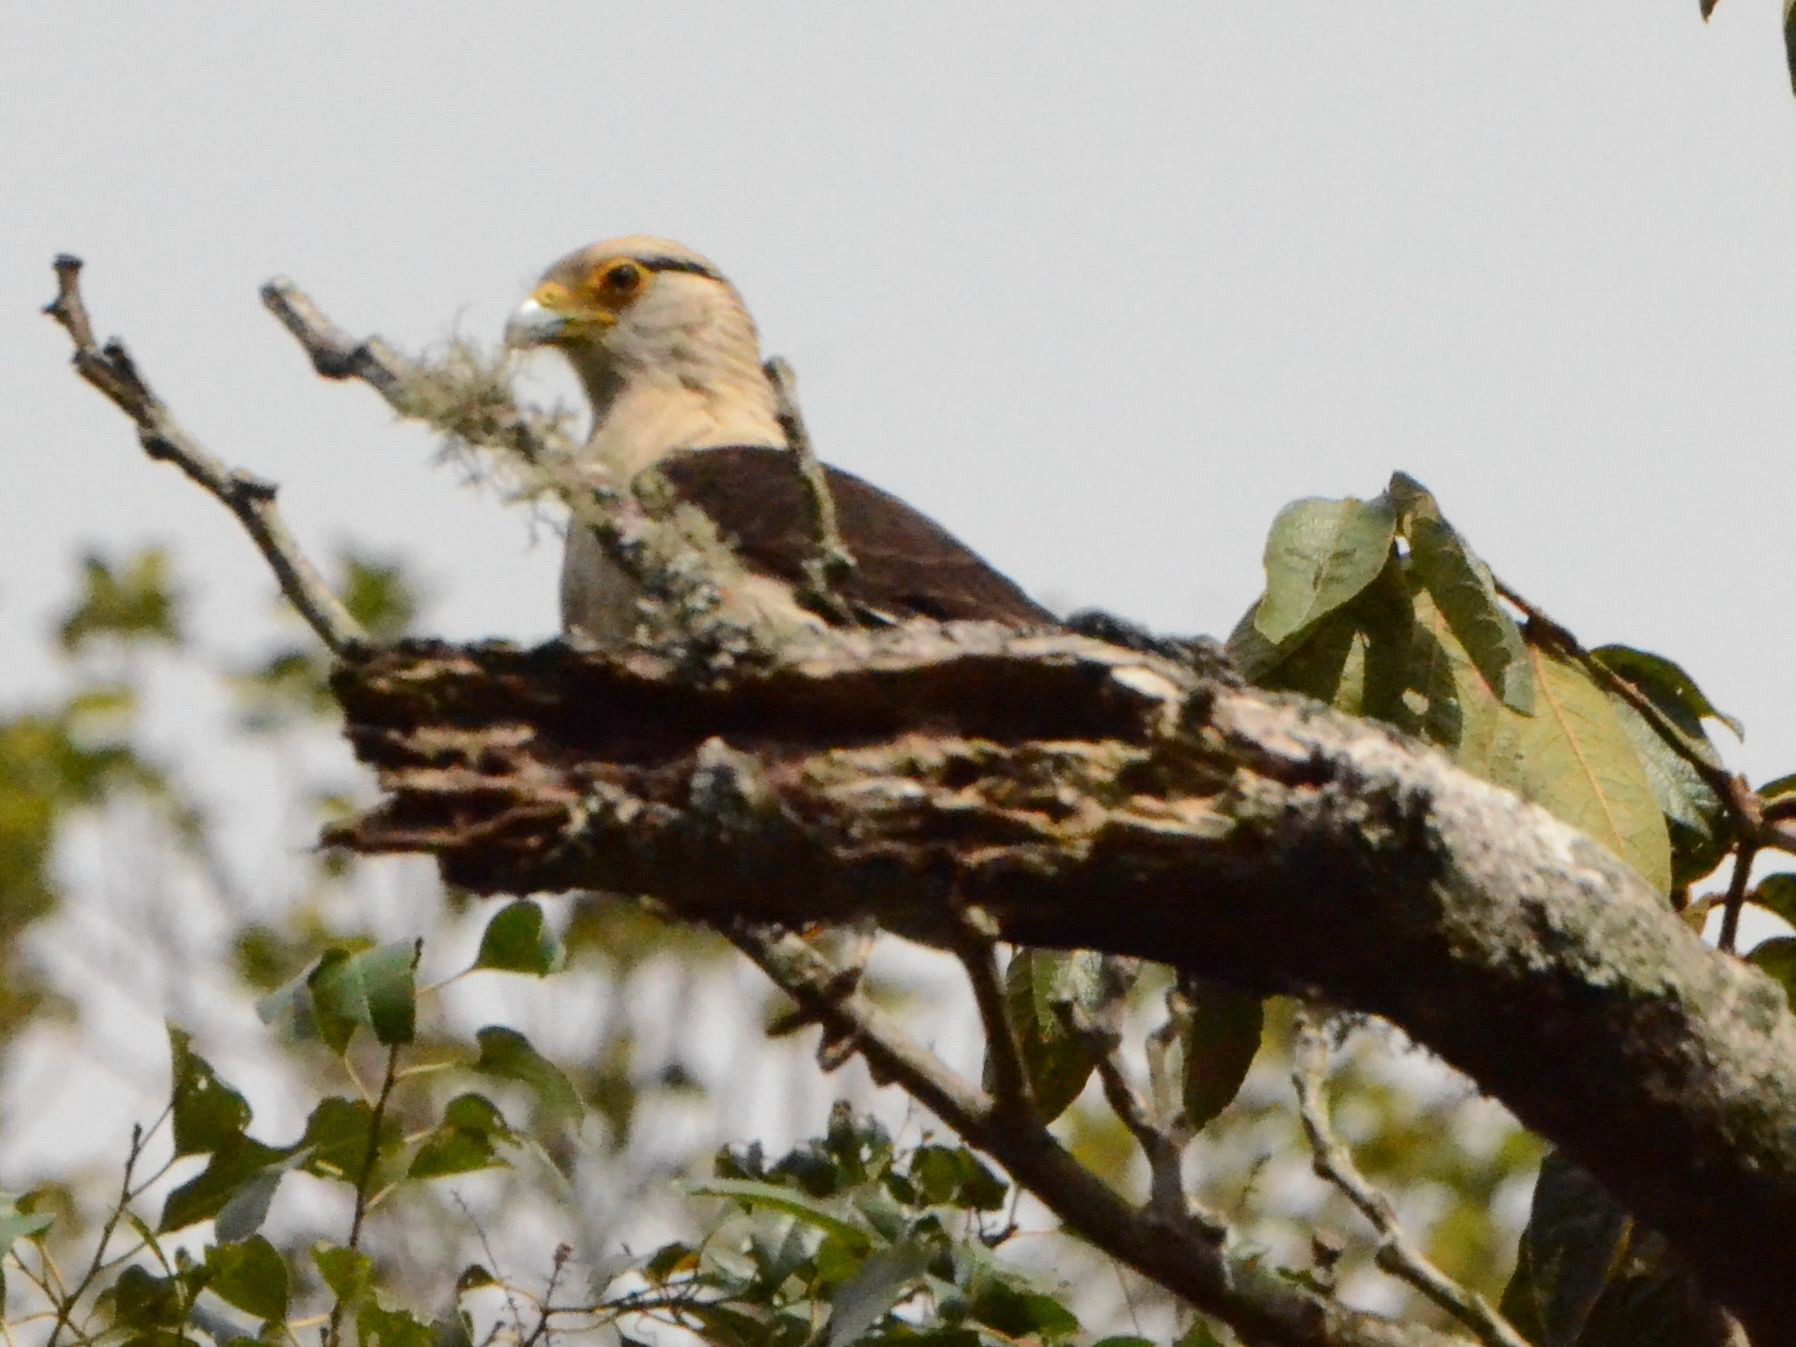 Click picture to see more Yellow-headed Caracaras.